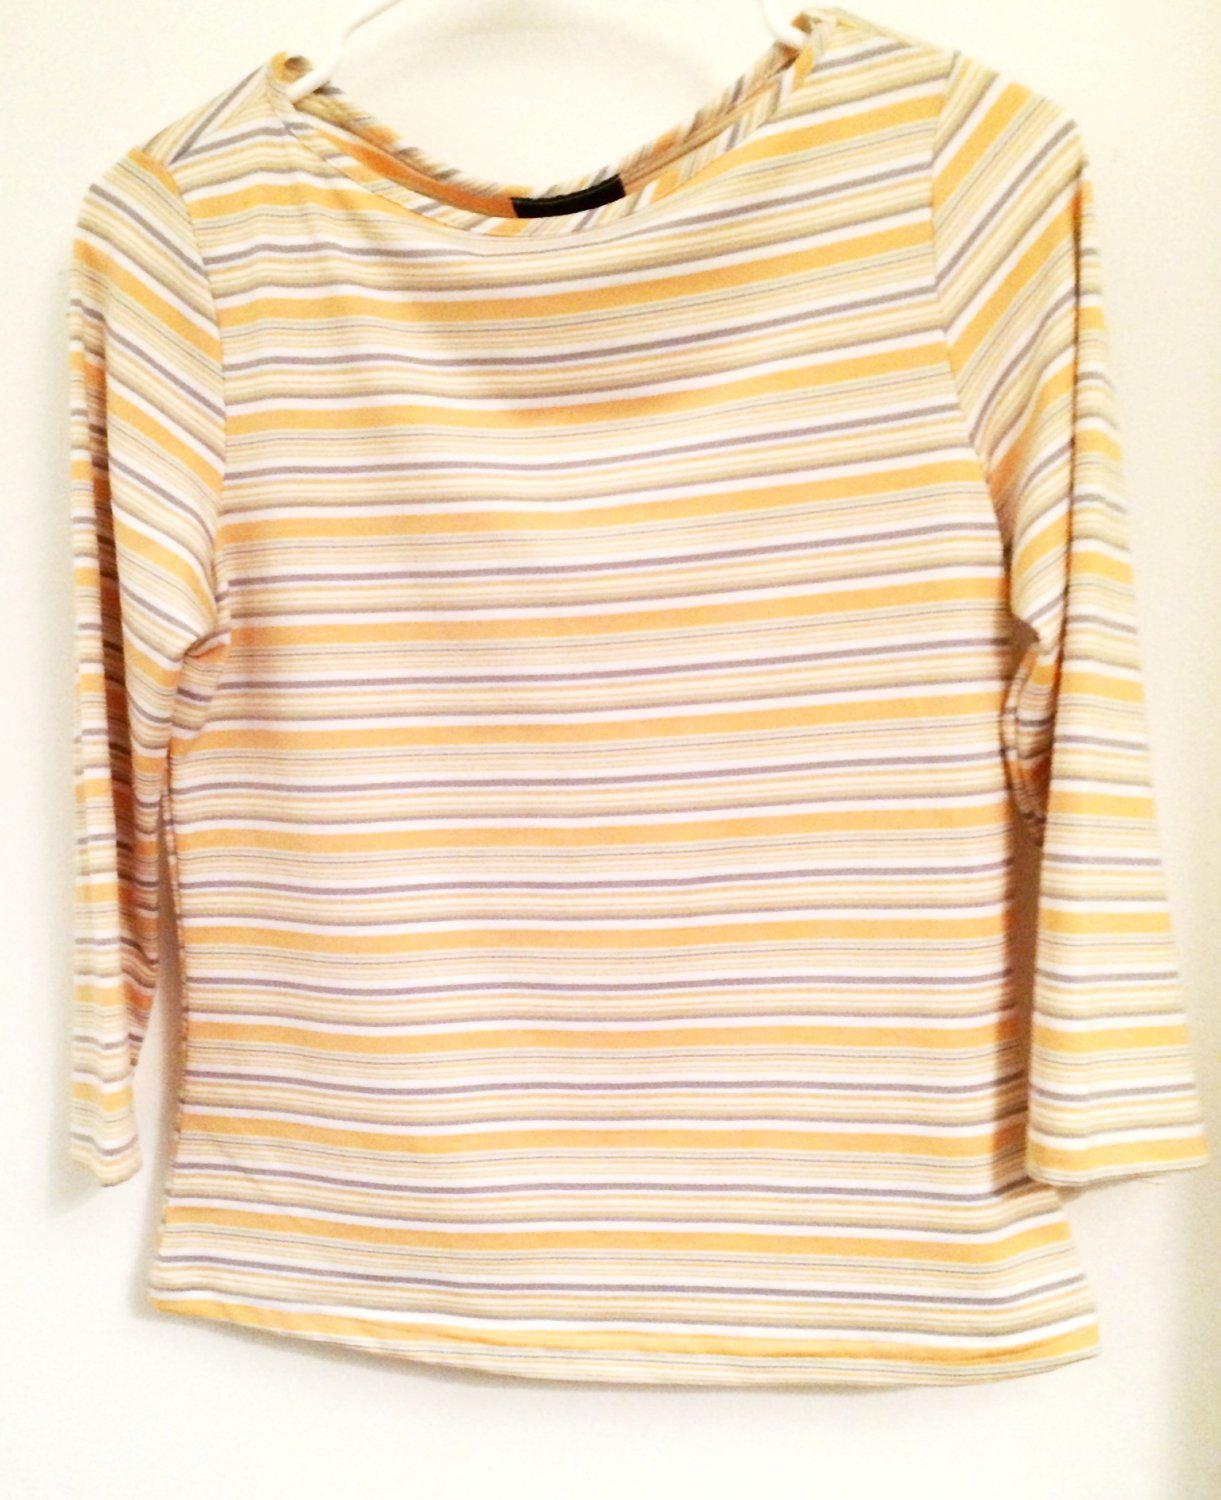 LAST ONE IN STOCK!!! Stripe Top Blouse (free gift with purchase)